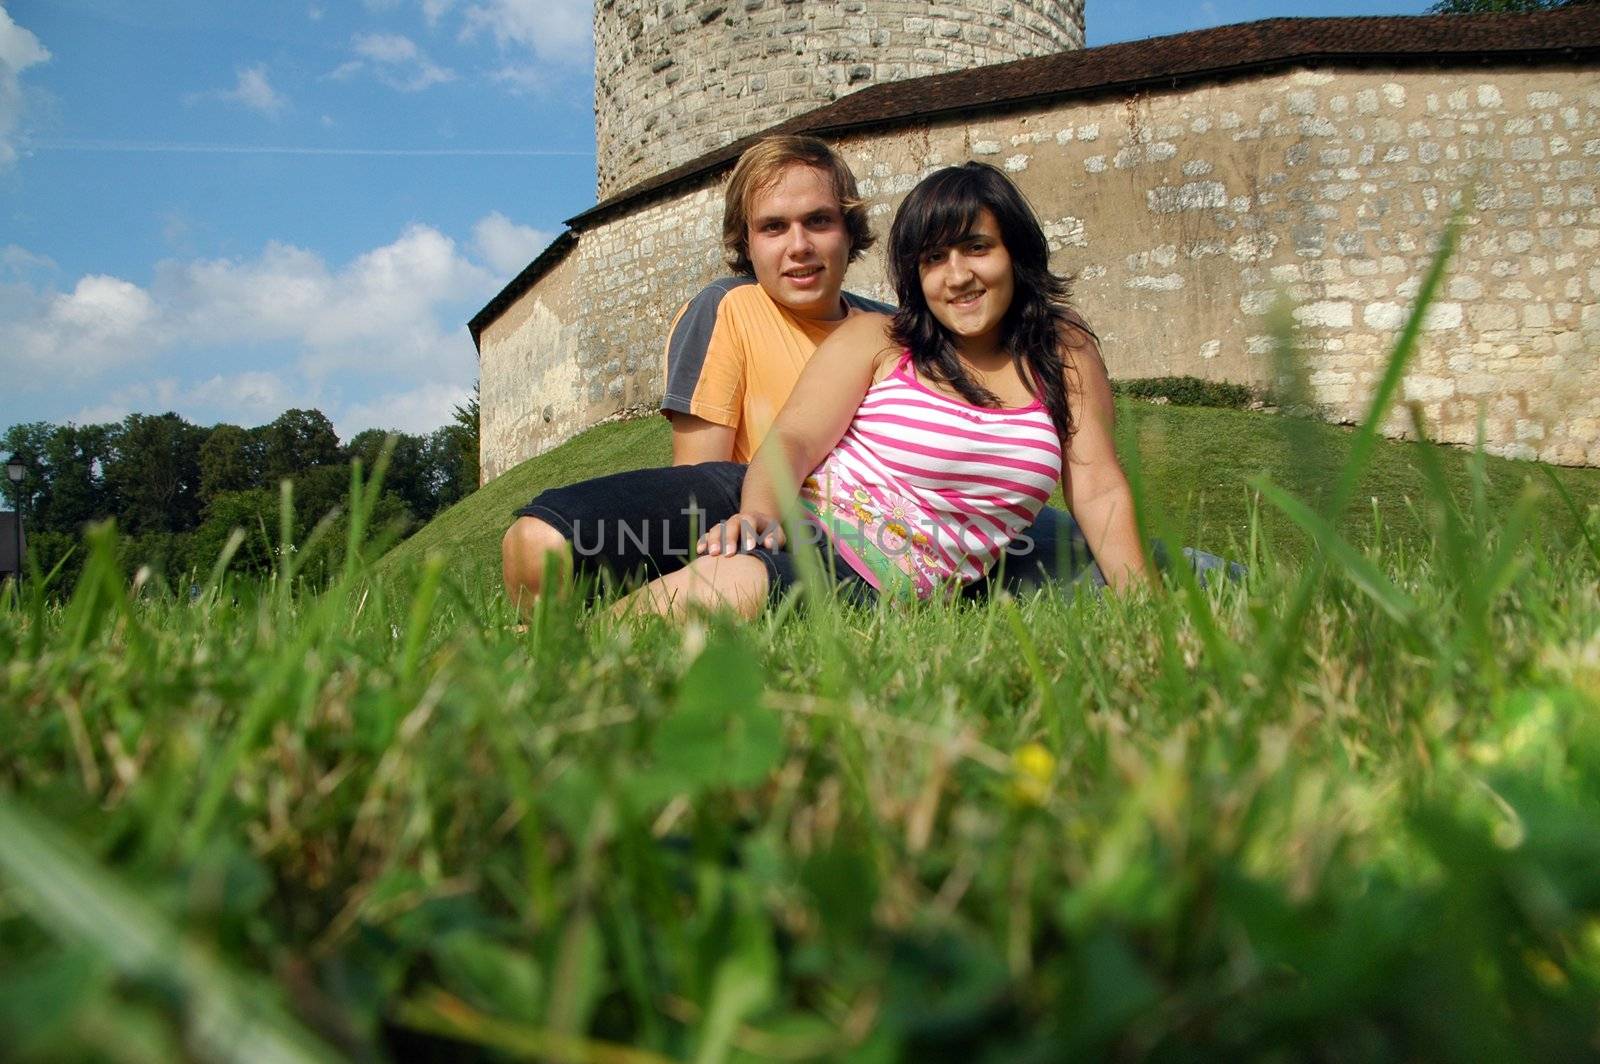 couple in green landscape with castle